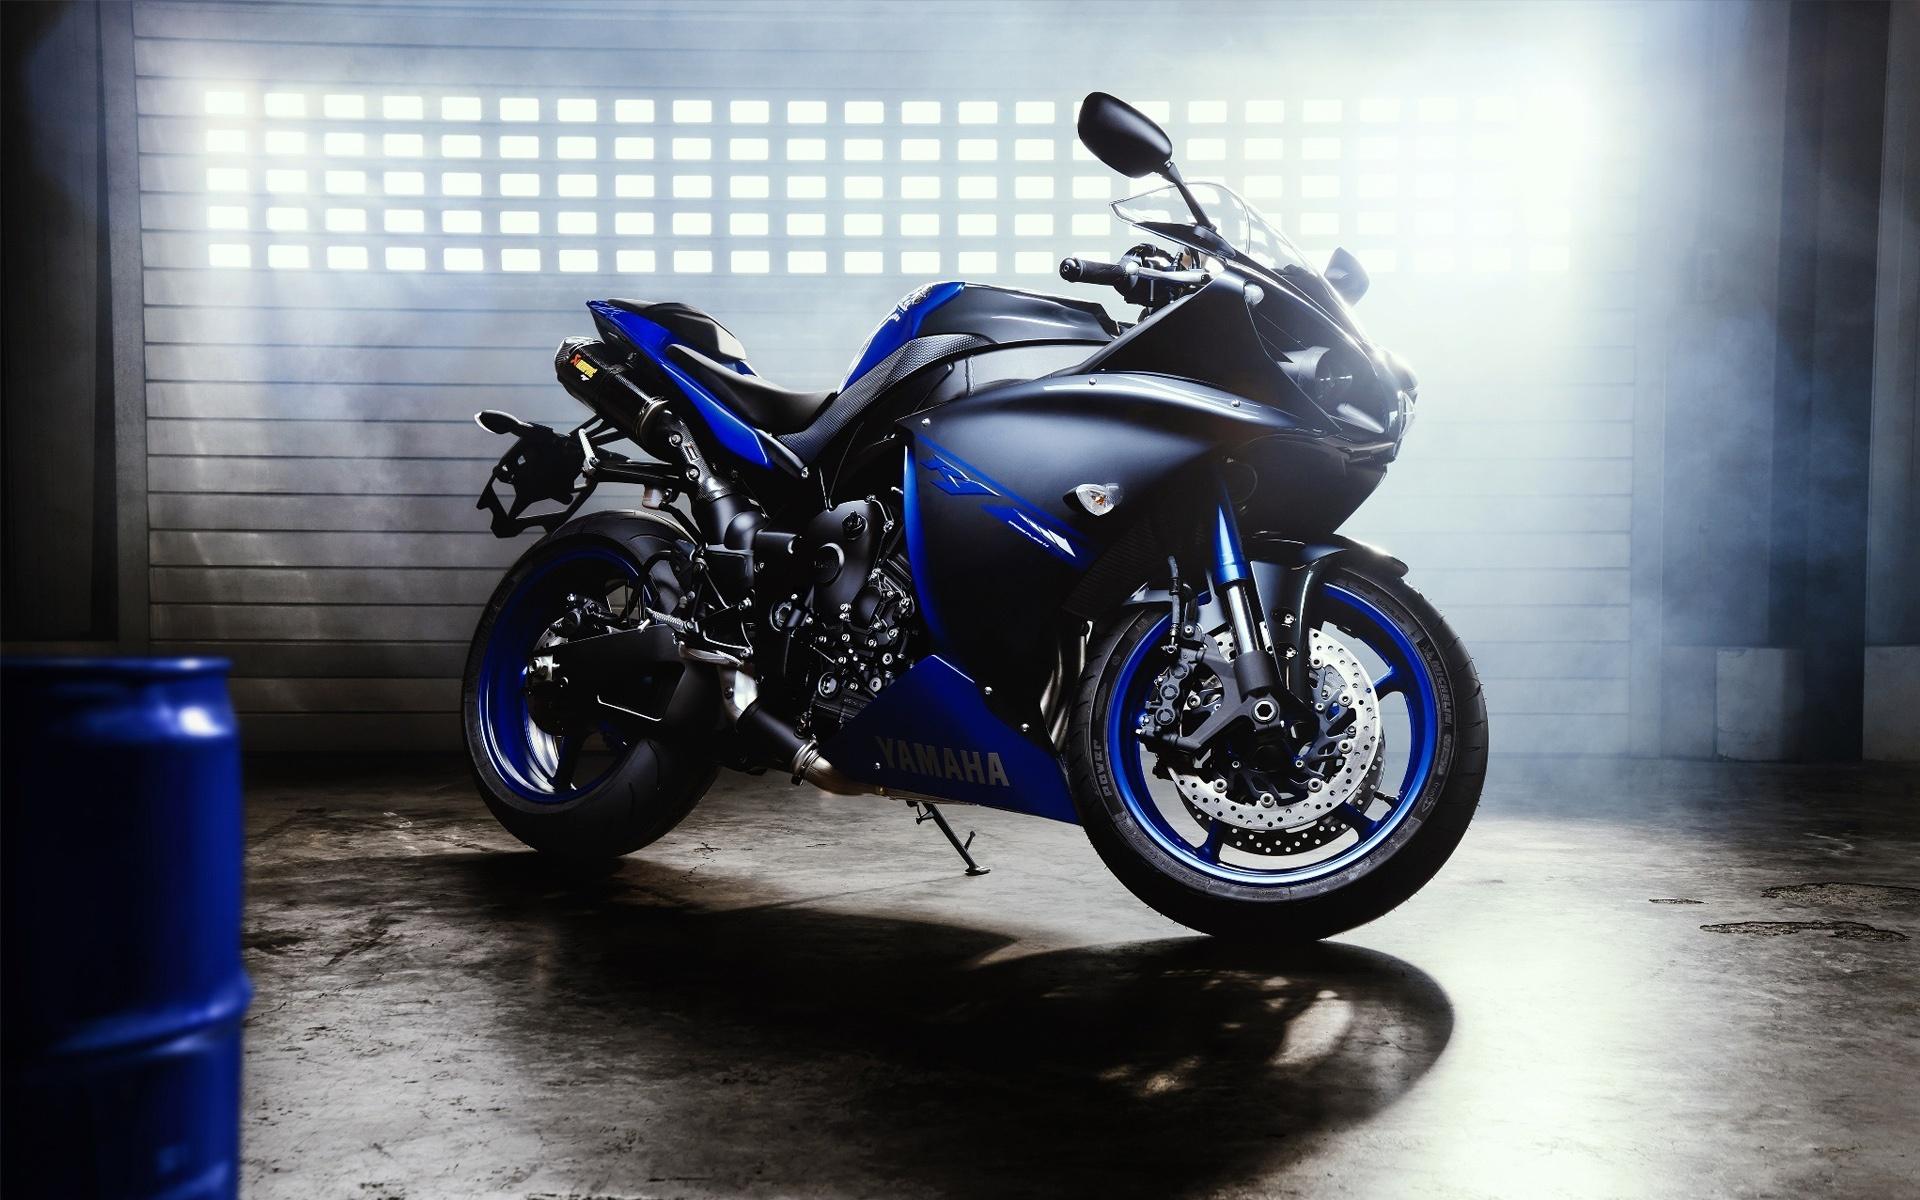 Yamaha YZF R1 Wallpaper in jpg format for free download